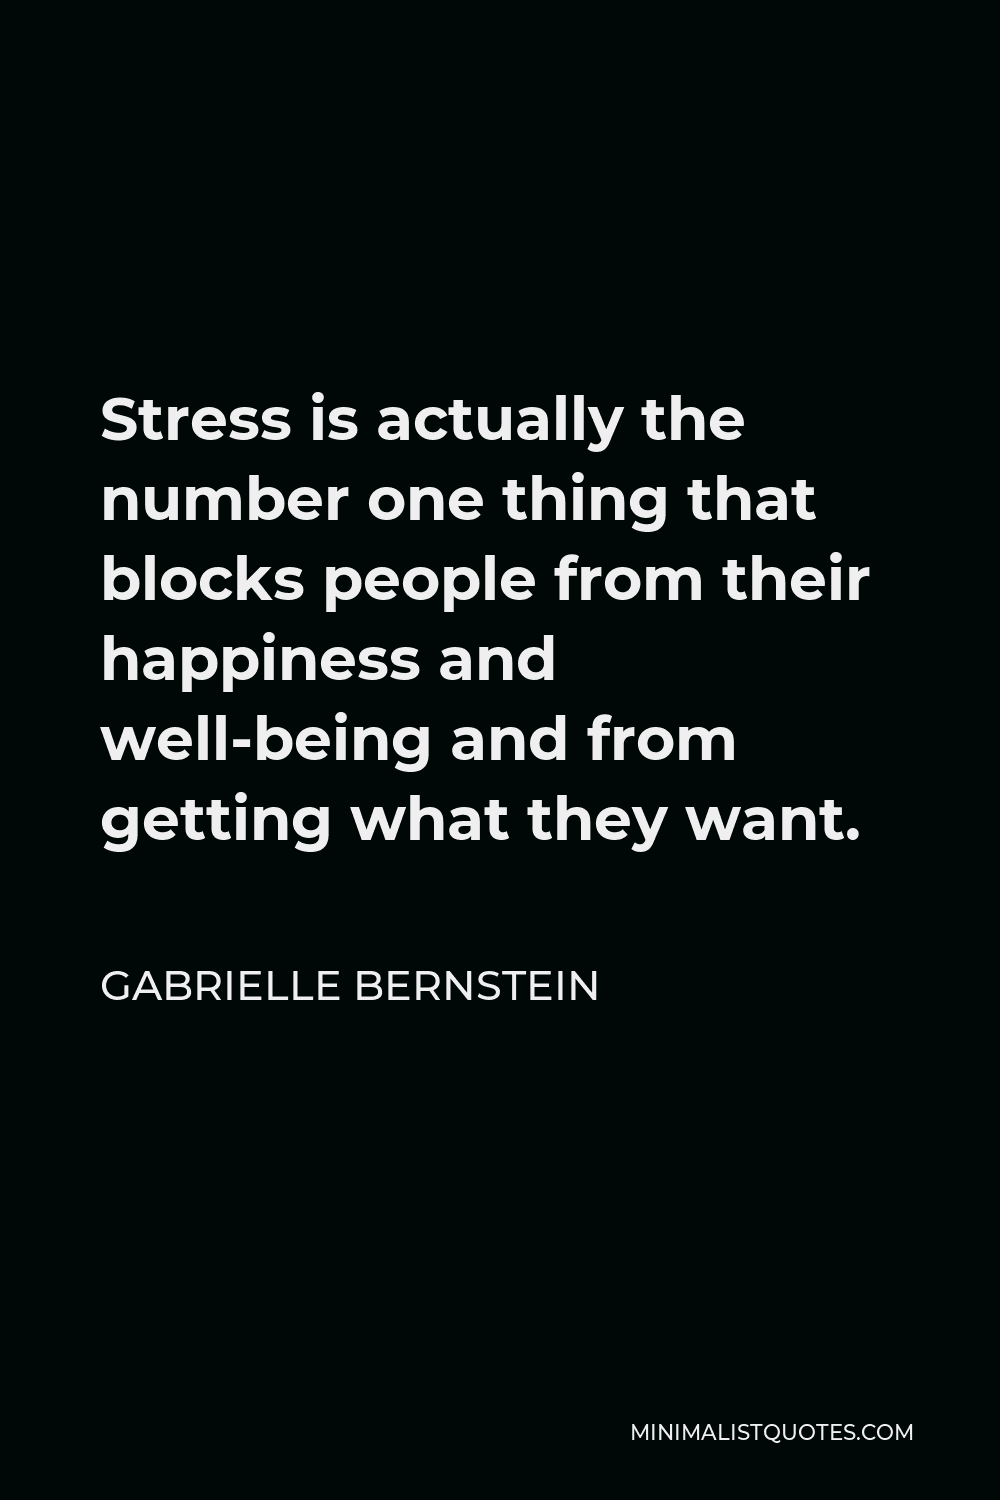 Gabrielle Bernstein Quote - Stress is actually the number one thing that blocks people from their happiness and well-being and from getting what they want.